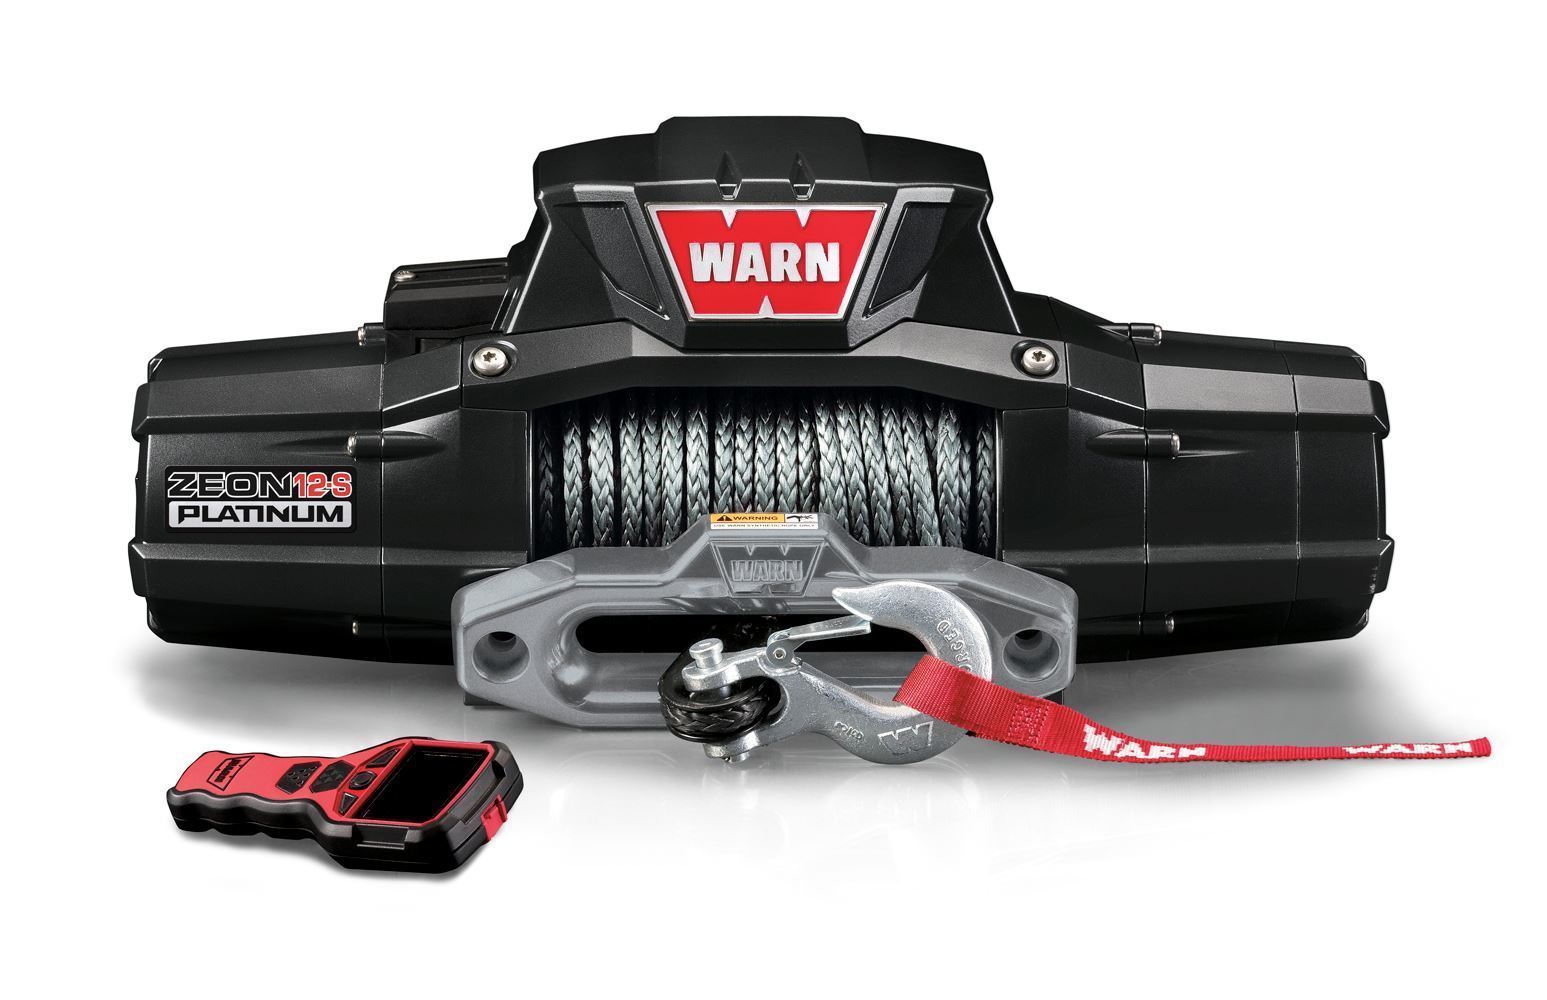 ZEON 12-S Platinum Winch 80' Synthetic Rope 12,000 Lb Capacity - 95960 Winch Warn Industries 